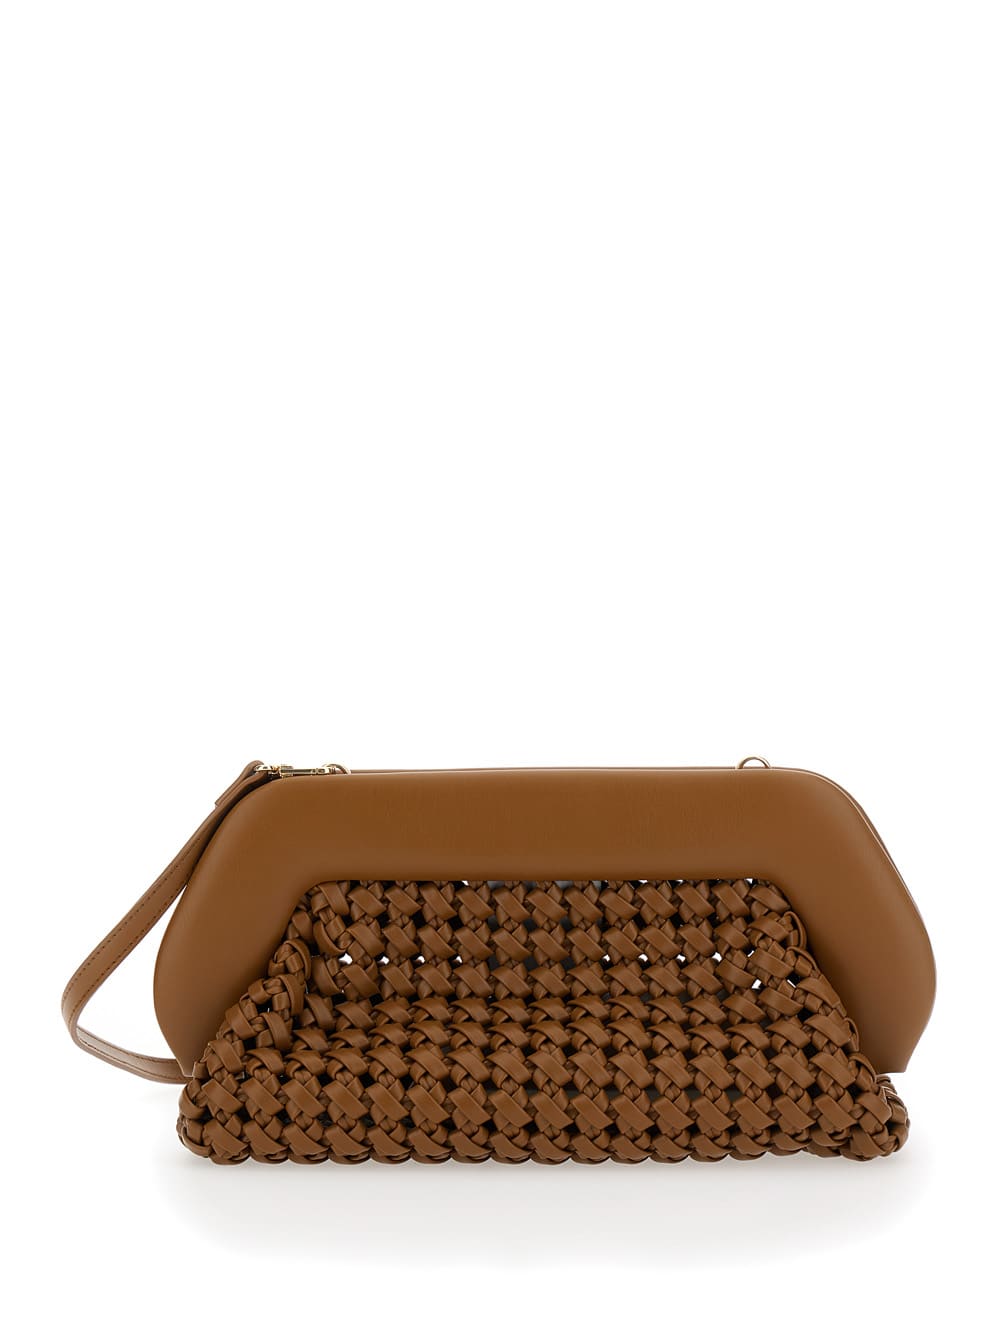 THEMOIRè bios Knots Brown Clutch Bag With Braided Design In Eco Leather Woman